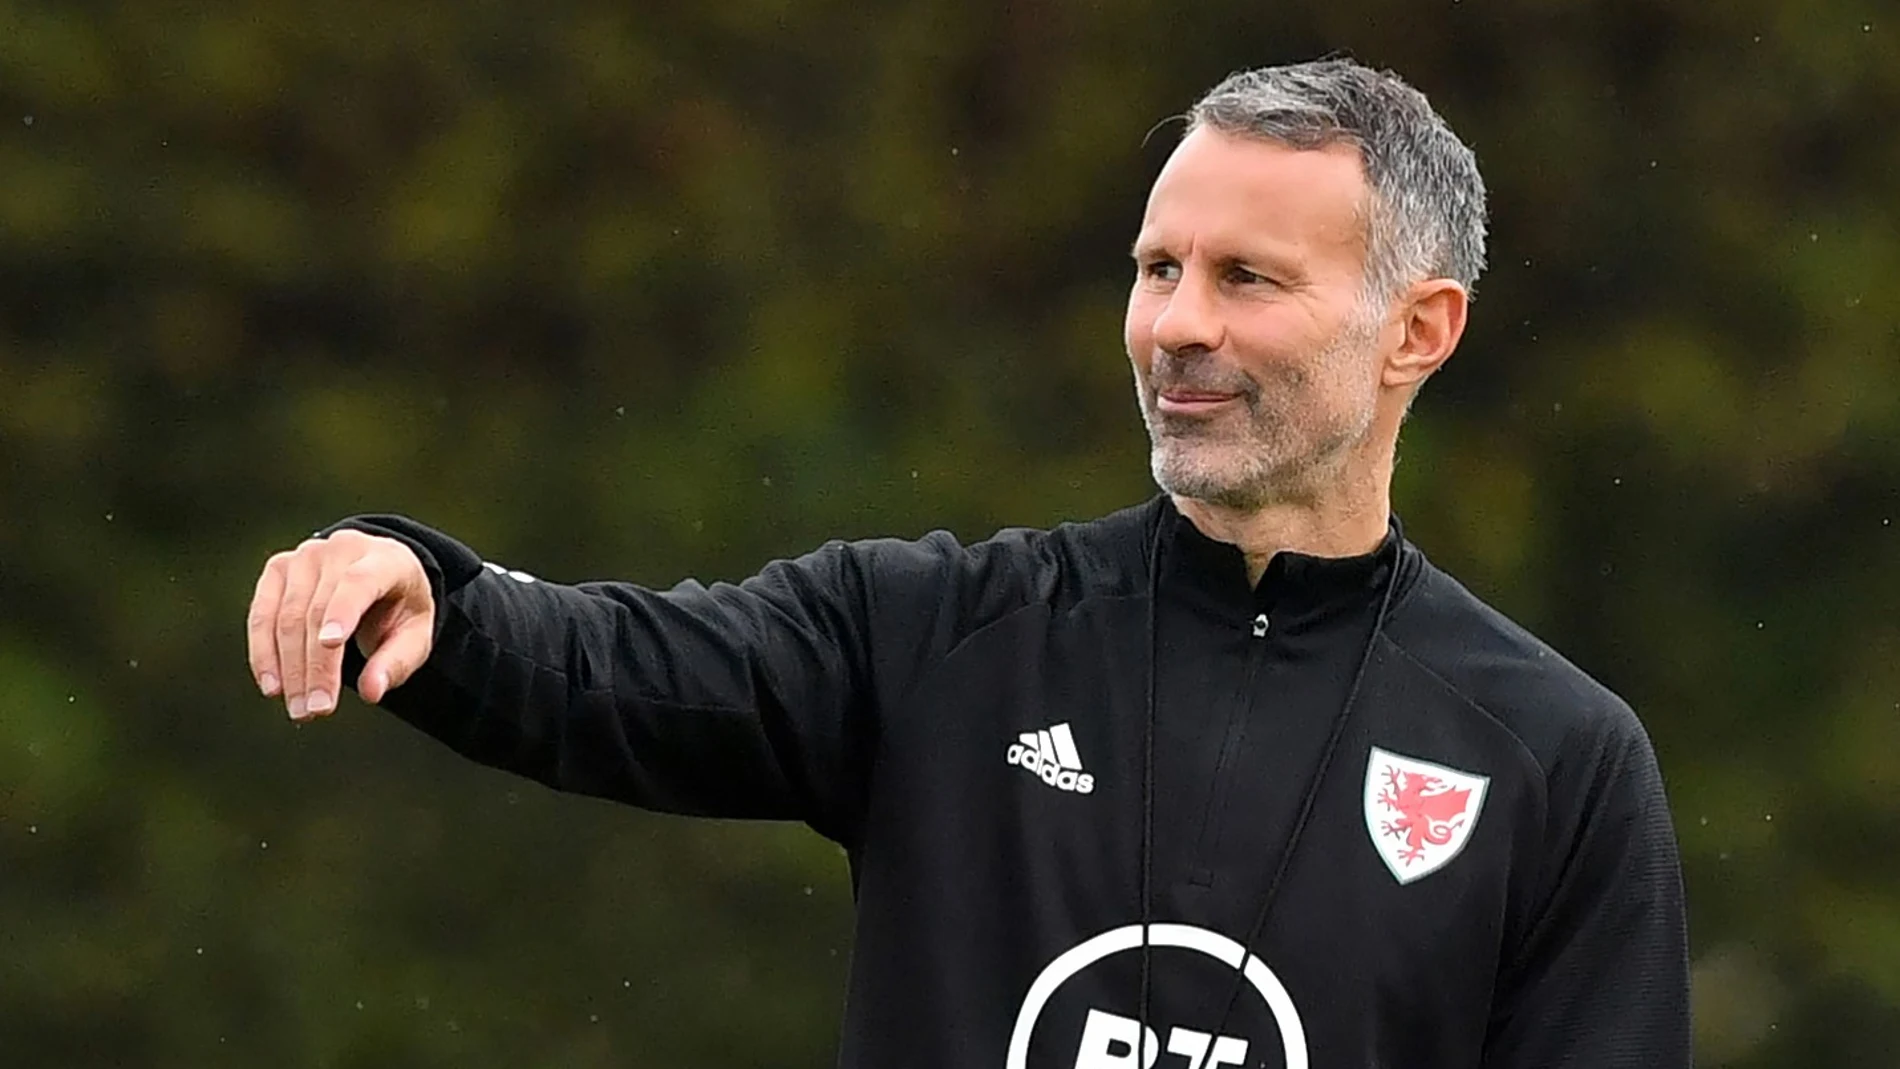 FILED - 02 September 2020, Wales, Hensol: Wales manager Ryan Giggs leads a training session at The Vale Resort, ahead of the UEFA Nations League Group H soccer matches against Finland and Bulgaria on 03 September and 06 September. Giggs has reportedly been arrested on suspicion of assaulting his girlfriend but has denied the charges. Photo: Ben Birchall/PA Wire/dpa (Foto de ARCHIVO)02/09/2020 ONLY FOR USE IN SPAIN